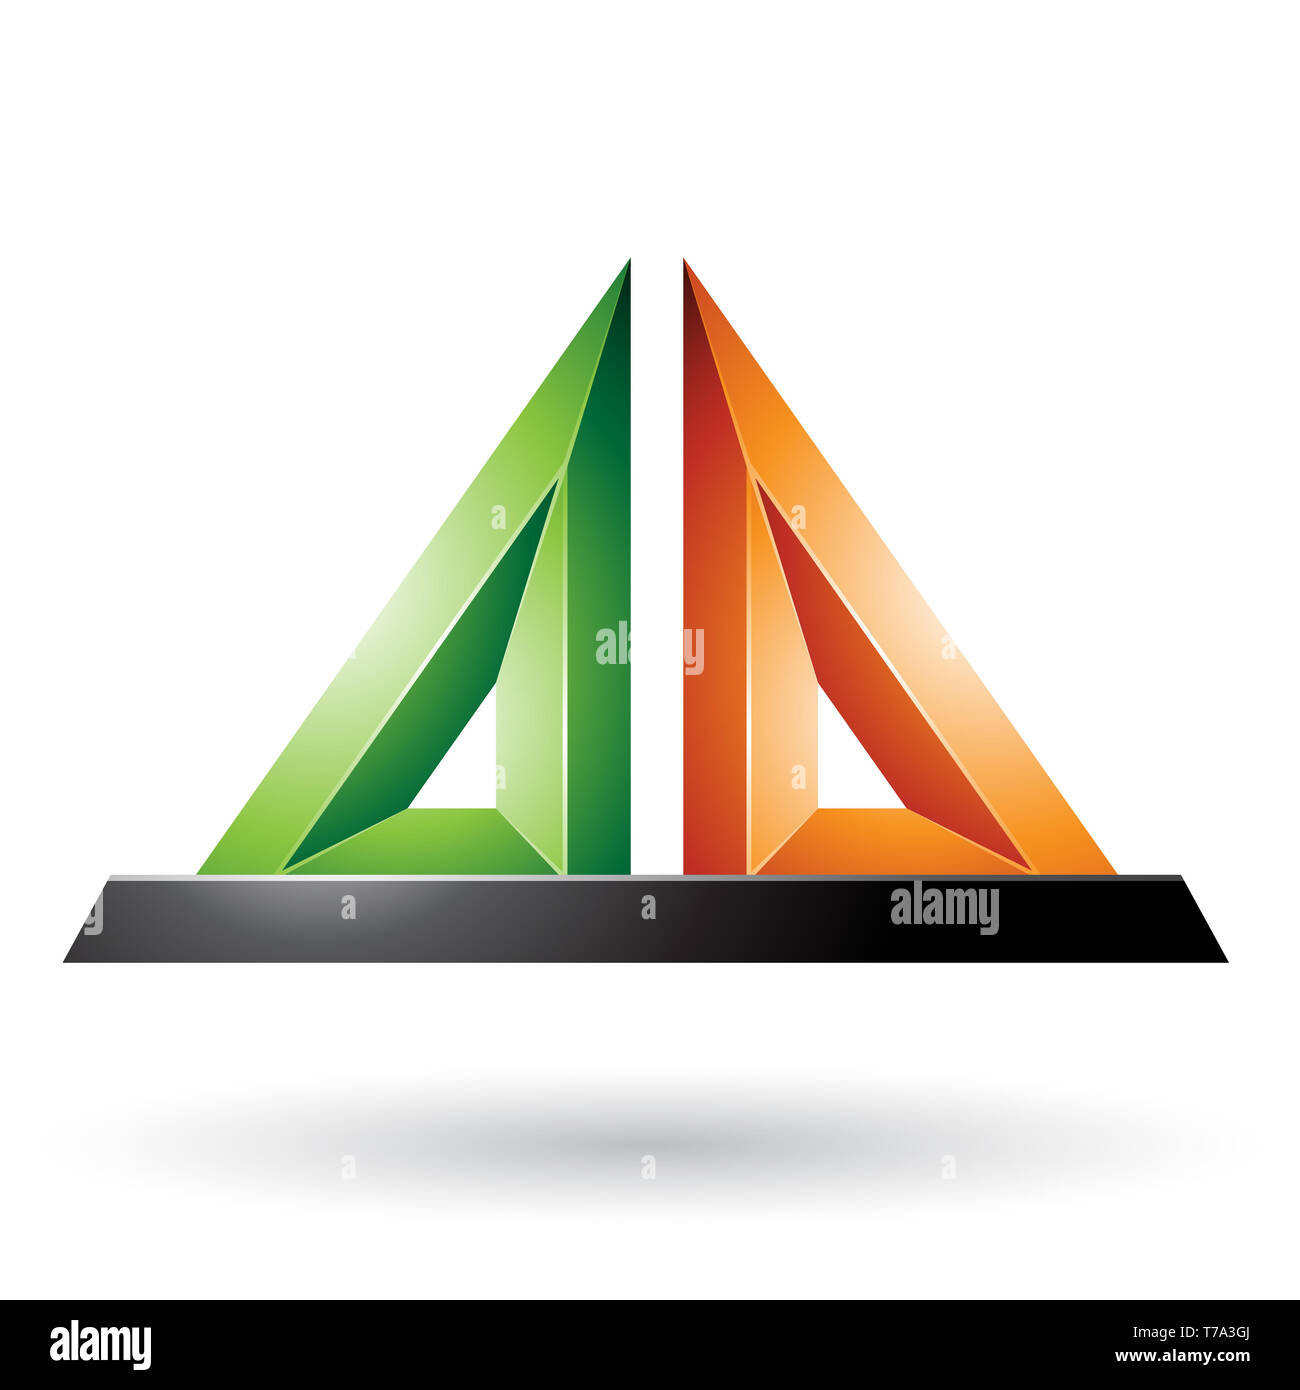 Vector Illustration of Green and Orange 3d Pyramidical Embossed Shape isolated on a White Background Stock Photo